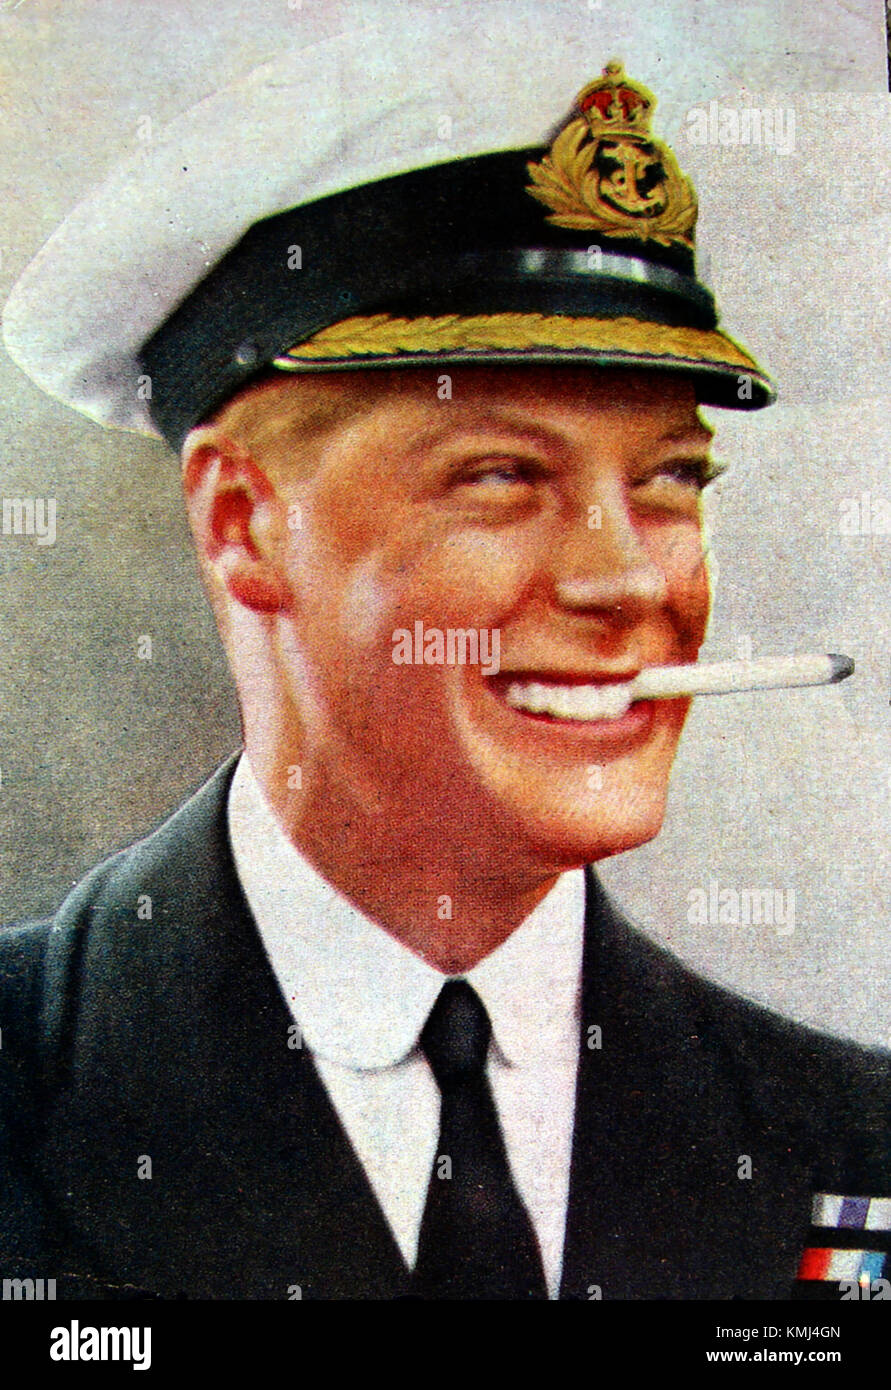 A full colour illustration of the Prince of Wales, (also Duke of Cornwall & Rothesay and Earl of Chester)  later King Edward VIII of Britain. Photographed in A Royal Navy naval uniform smoking a cigarette. (He later abdicated to marry an American divorcee Mrs Wallis Simpson in 1937) Stock Photo